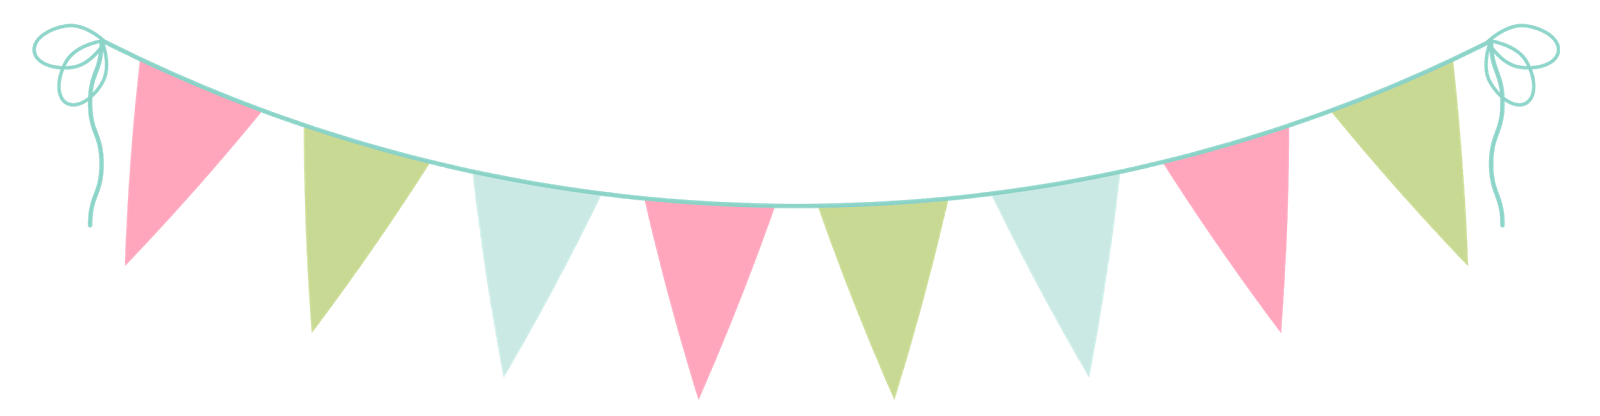 The inner wheel club. Pennant clipart bunting